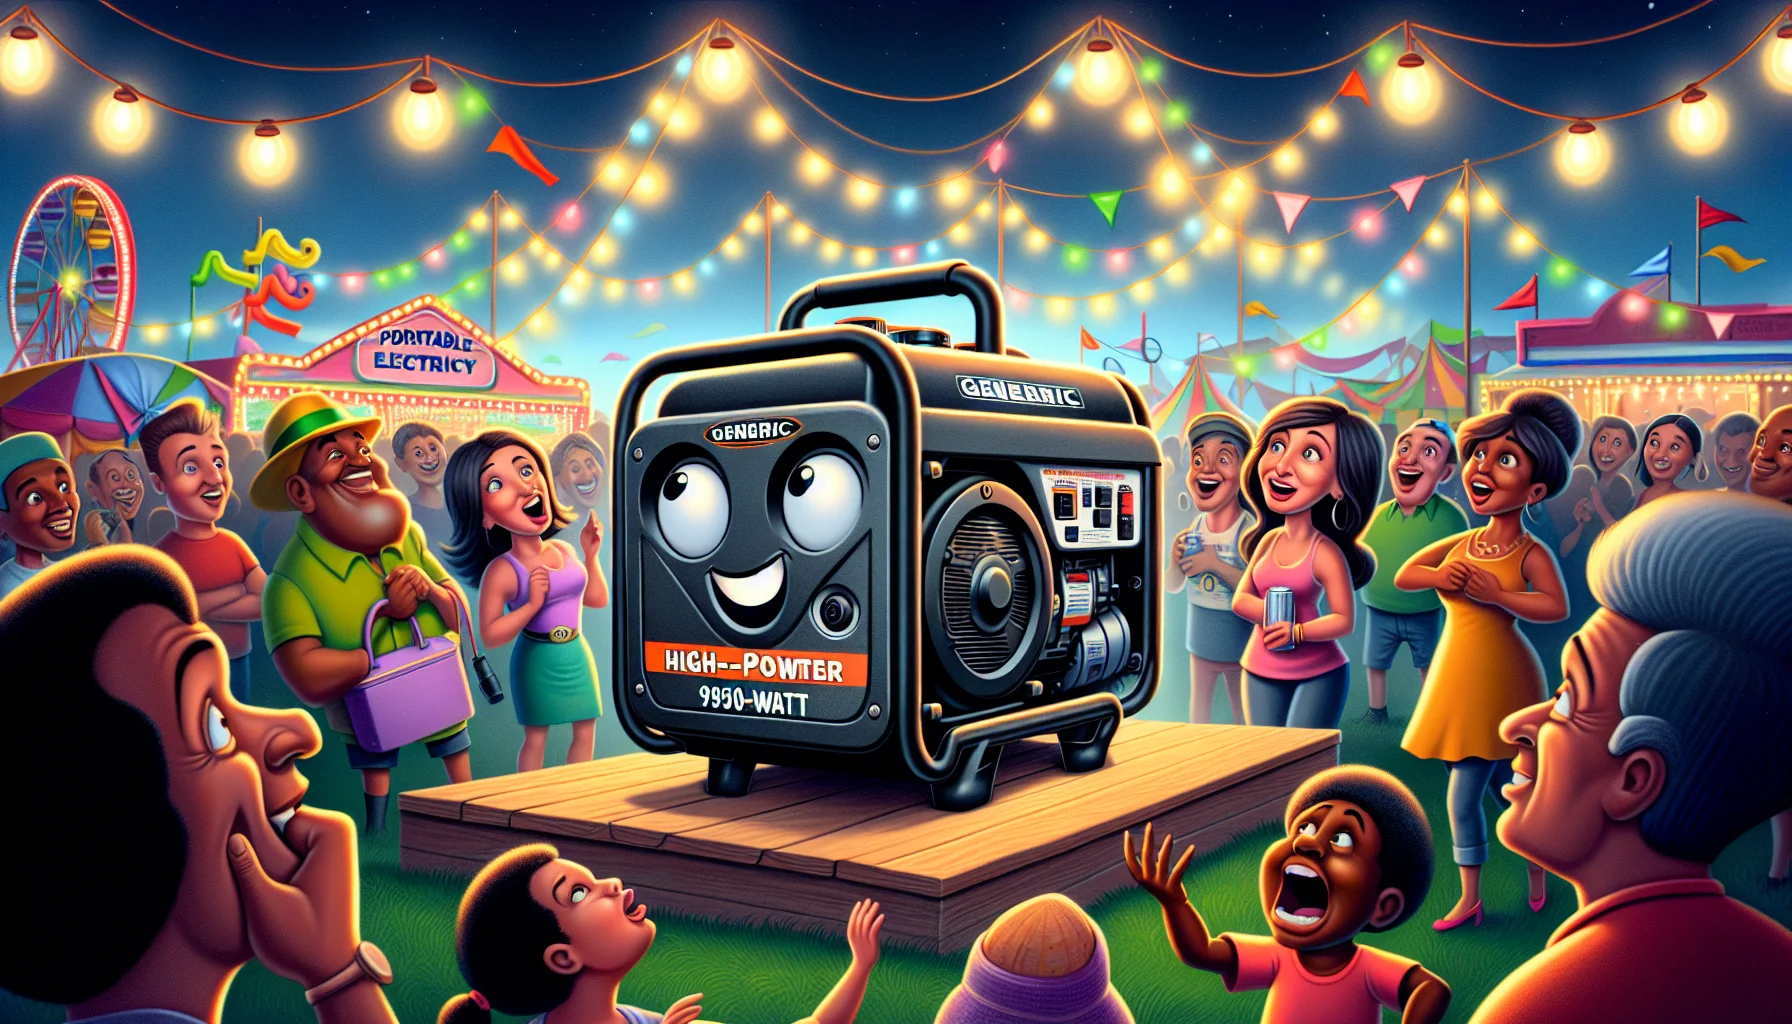 A vibrant, whimsical scene featuring a generic, high-power, 9500-watt portable generator in a humorous setting. The generator is anthropomorphized, boasting a friendly smile as it proudly cranks out electricity. It's situated at the center of a bustling fairground, brightly lit by lights powered by the generator itself. A diverse array of people, including an intrigued Caucasian woman, a delighted Black man, and a Hispanic child wide-eyed with amazement, gather to watch. Their expressions hint at the enjoyment and convenience brought by the reliable electricity source. The illustration style communicates a sense of charm, realism, and lighthearted humor.